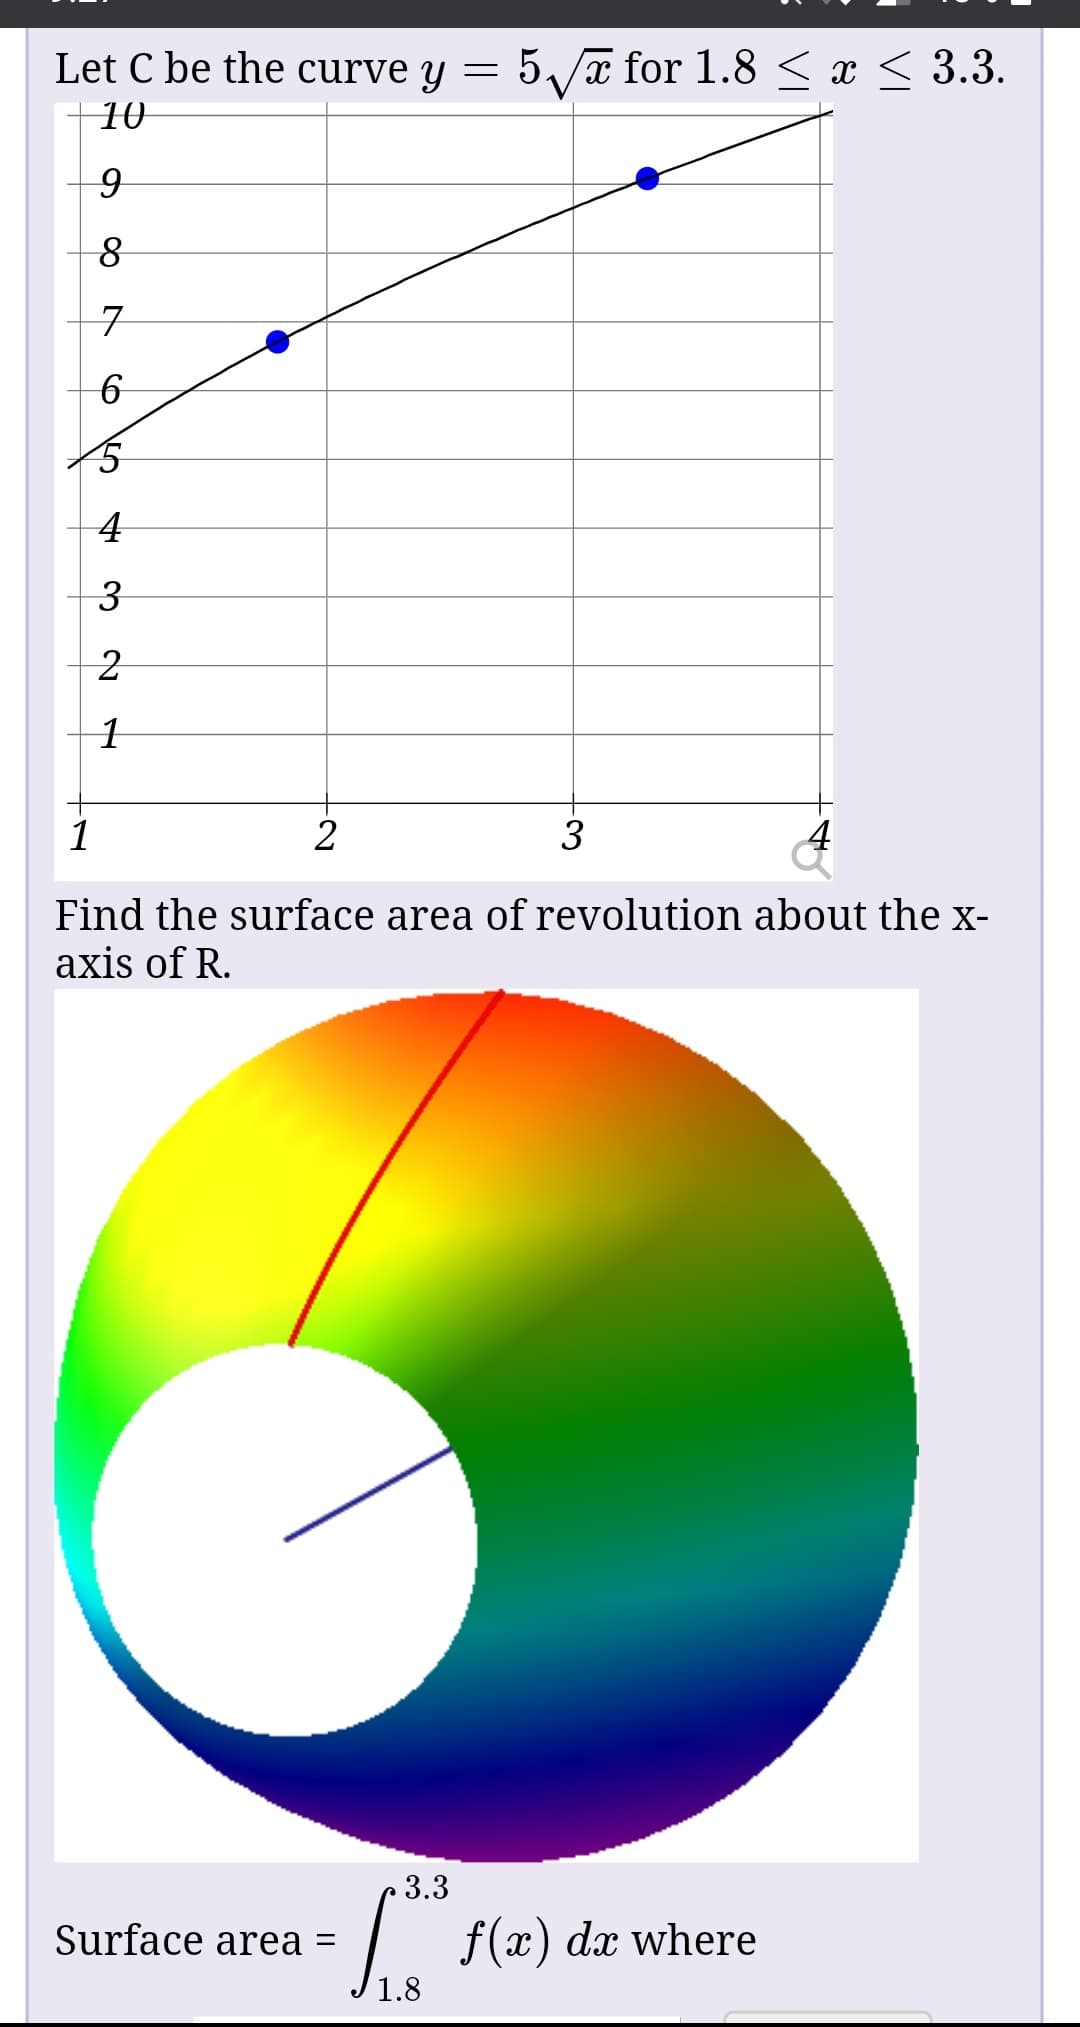 Let C be the curve y = 5/a for 1.8 < x < 3.3.
10
3
Find the surface area of revolution about the x-
axis of R.
3.3
f(x)
Surface area =
dx where
1.8
